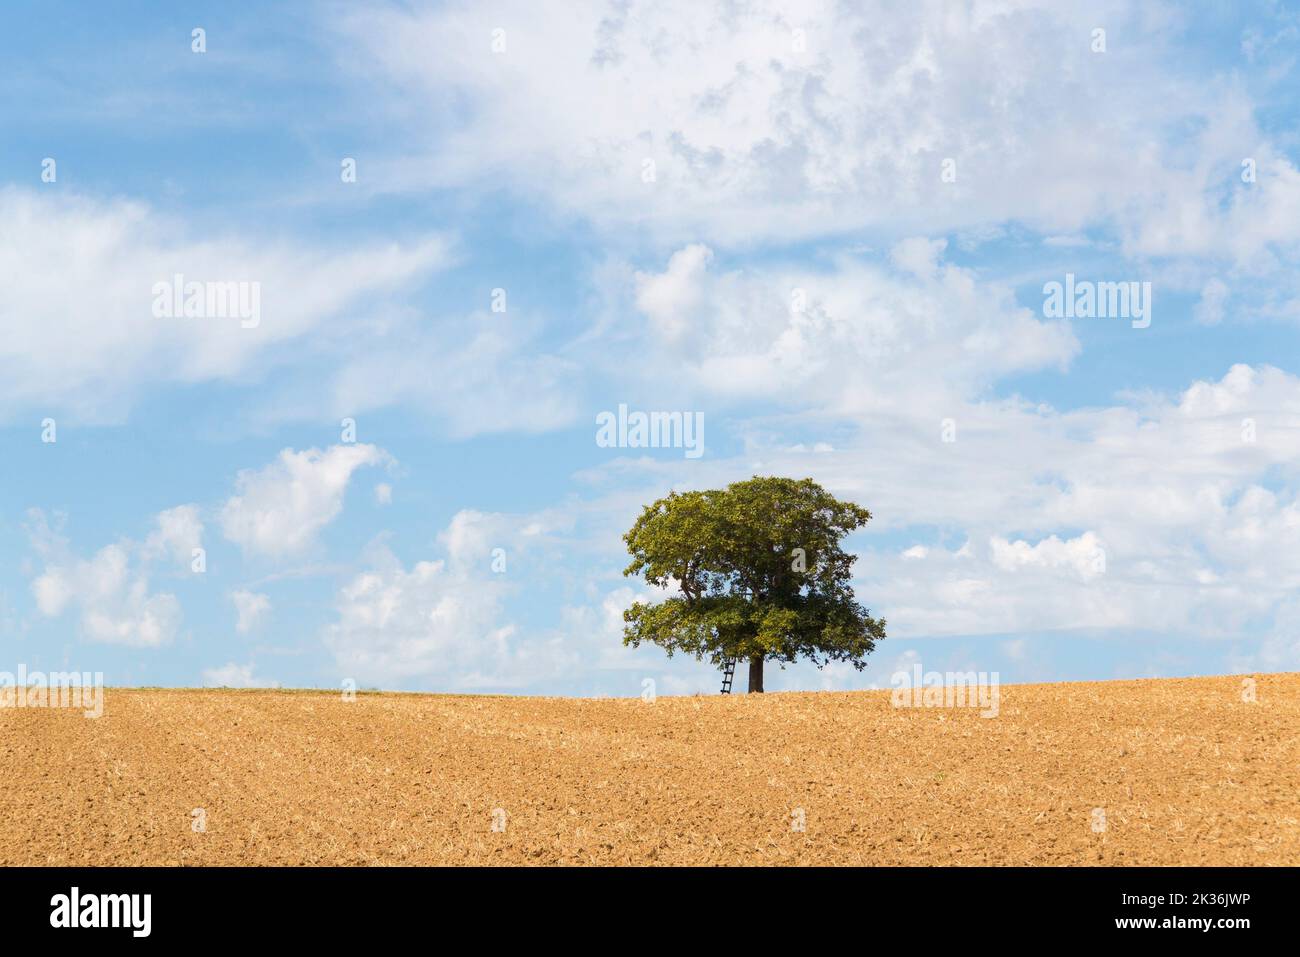 Tree in a field with blue sky und white fluffy clouds Stock Photo